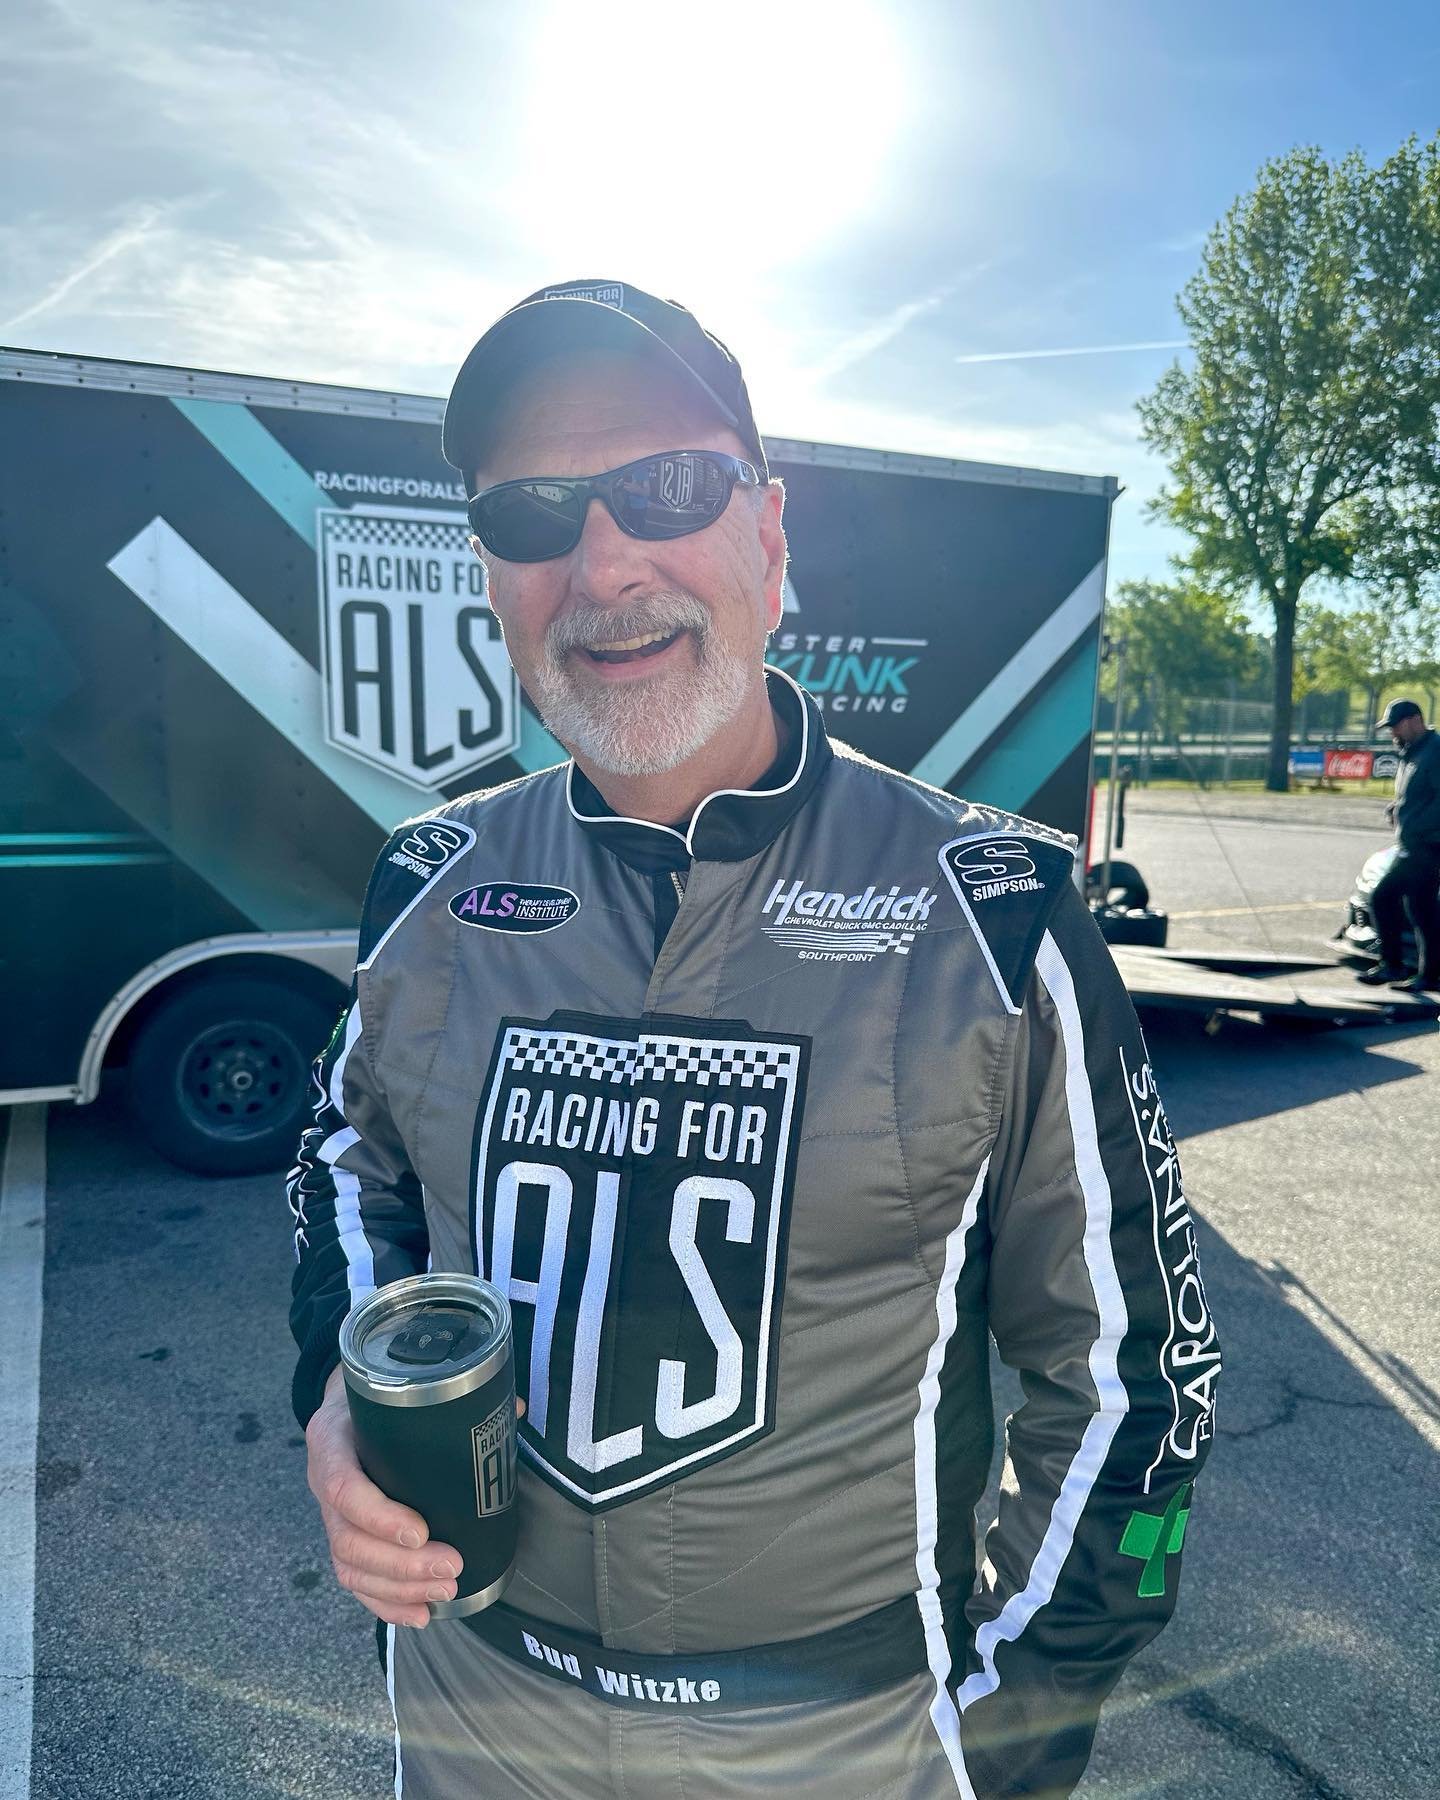 Our friend and team driver Bud is so @racingforals that you can see it in his eyes!! (Zoom in or swipe to see!). 
&hellip;
#racer #racing #firesuit #als #mnd #endals